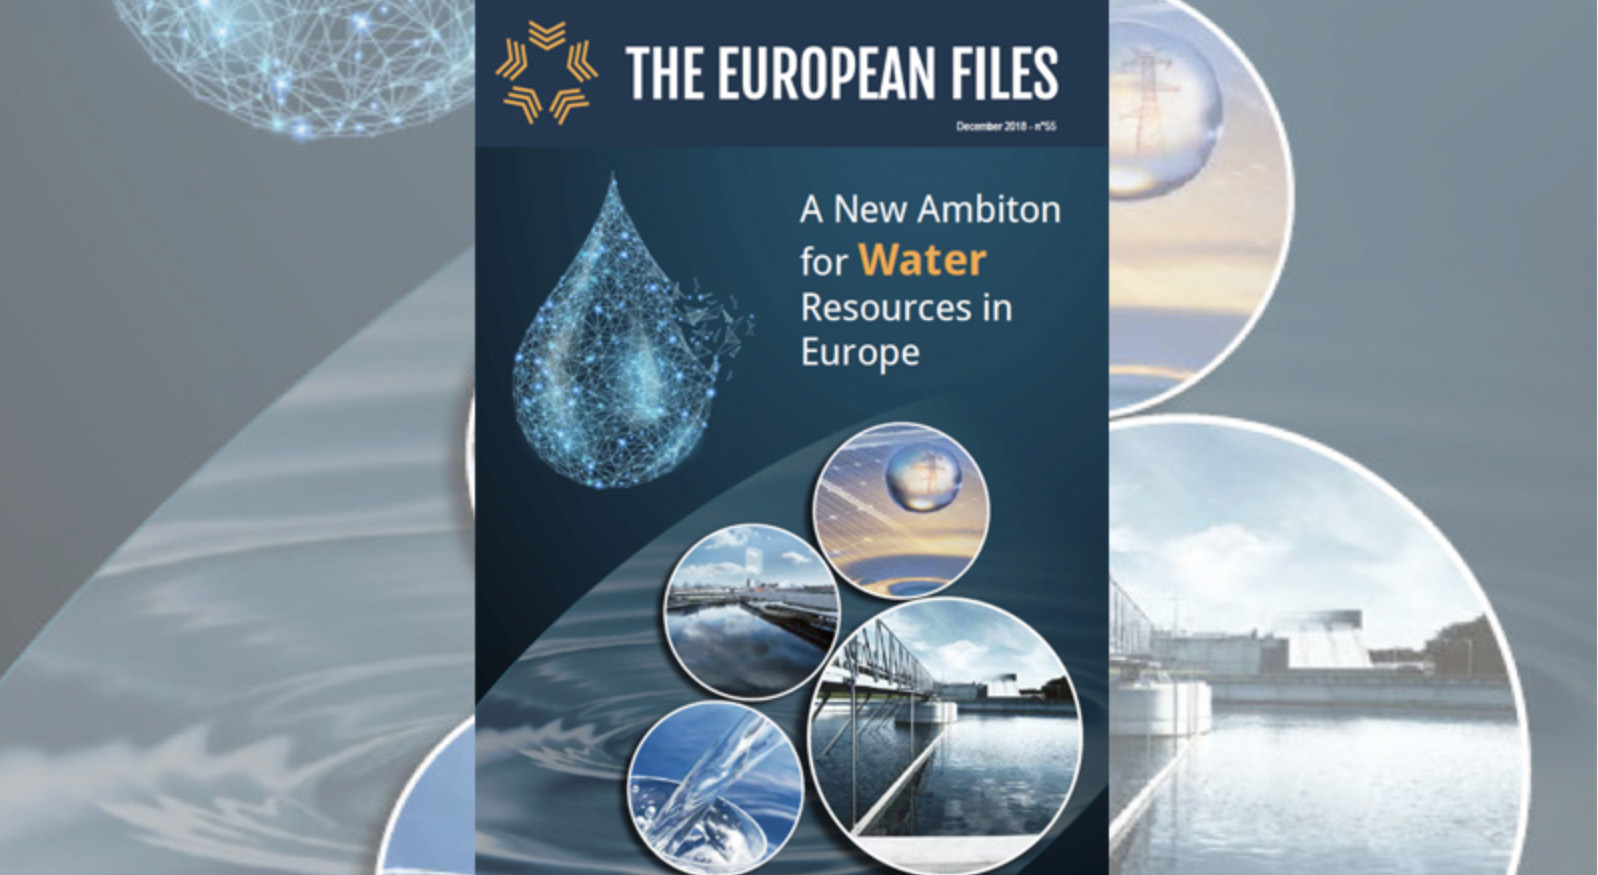 A New Ambiton for Water Resources in Europe